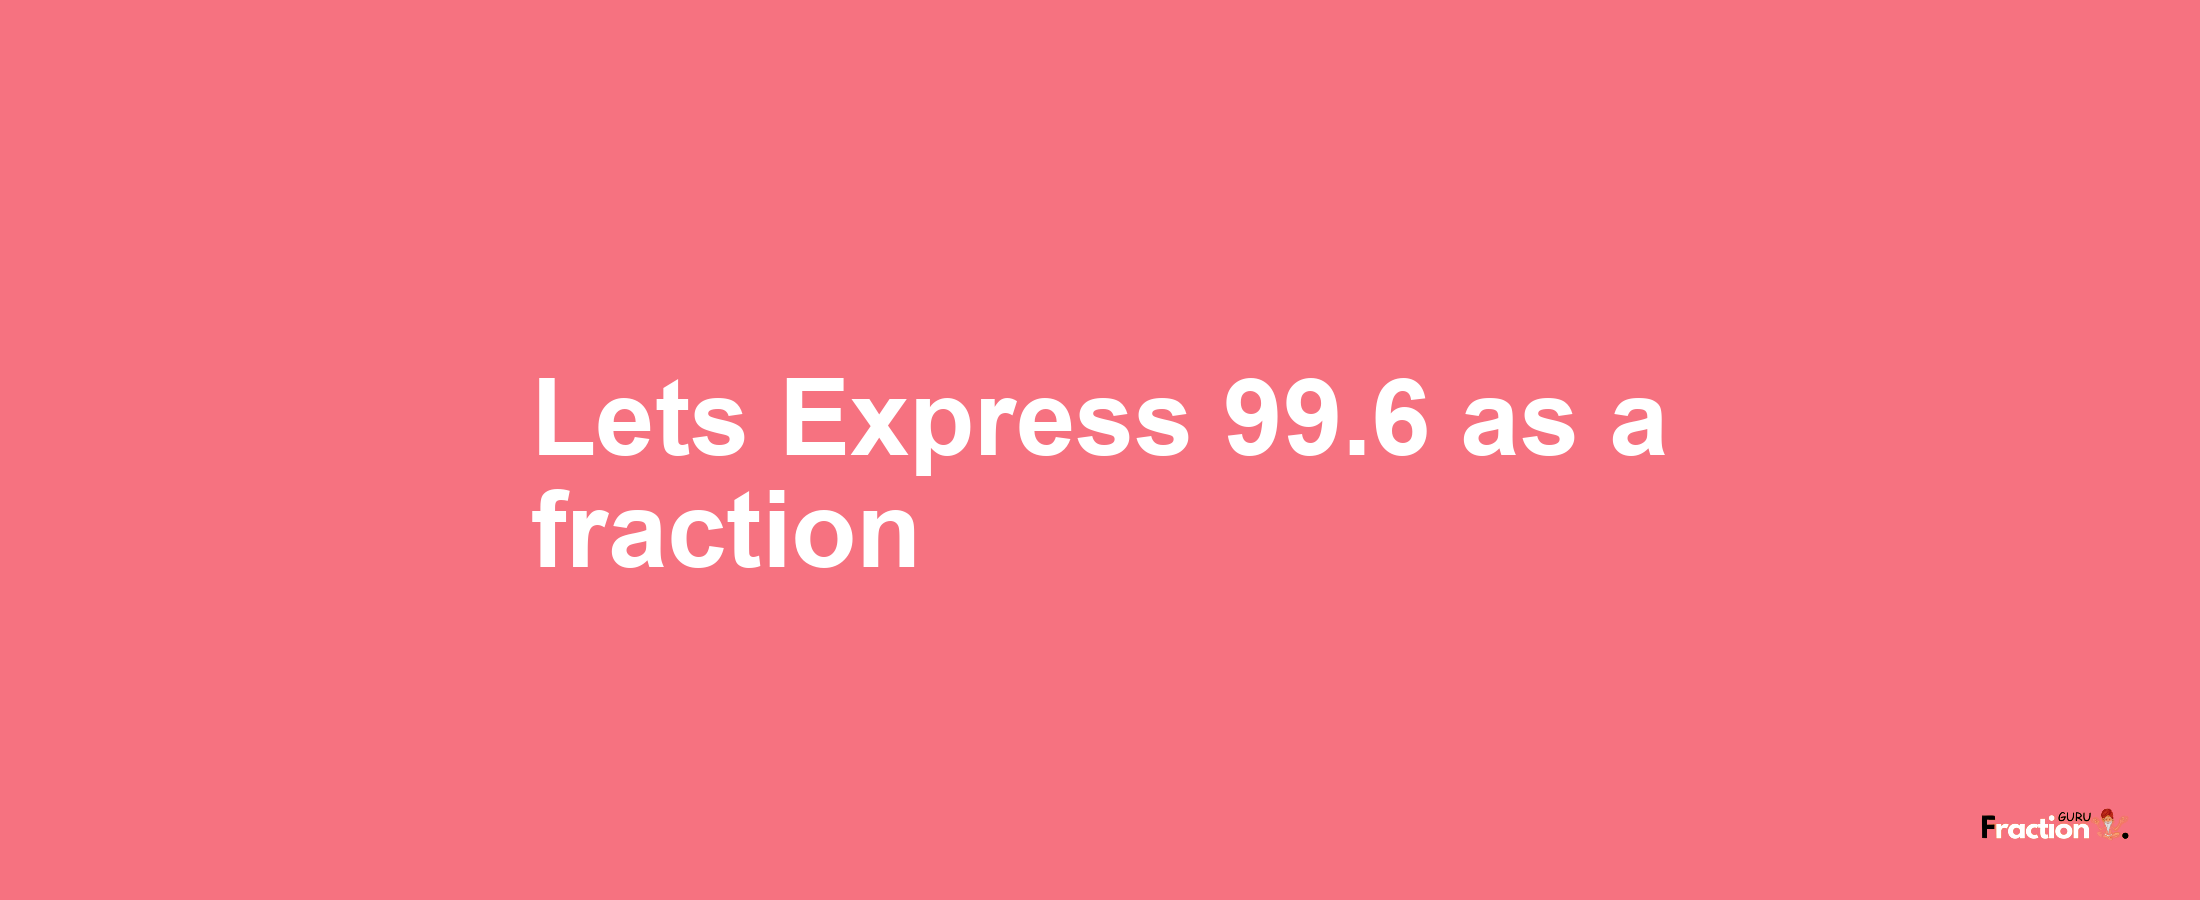 Lets Express 99.6 as afraction